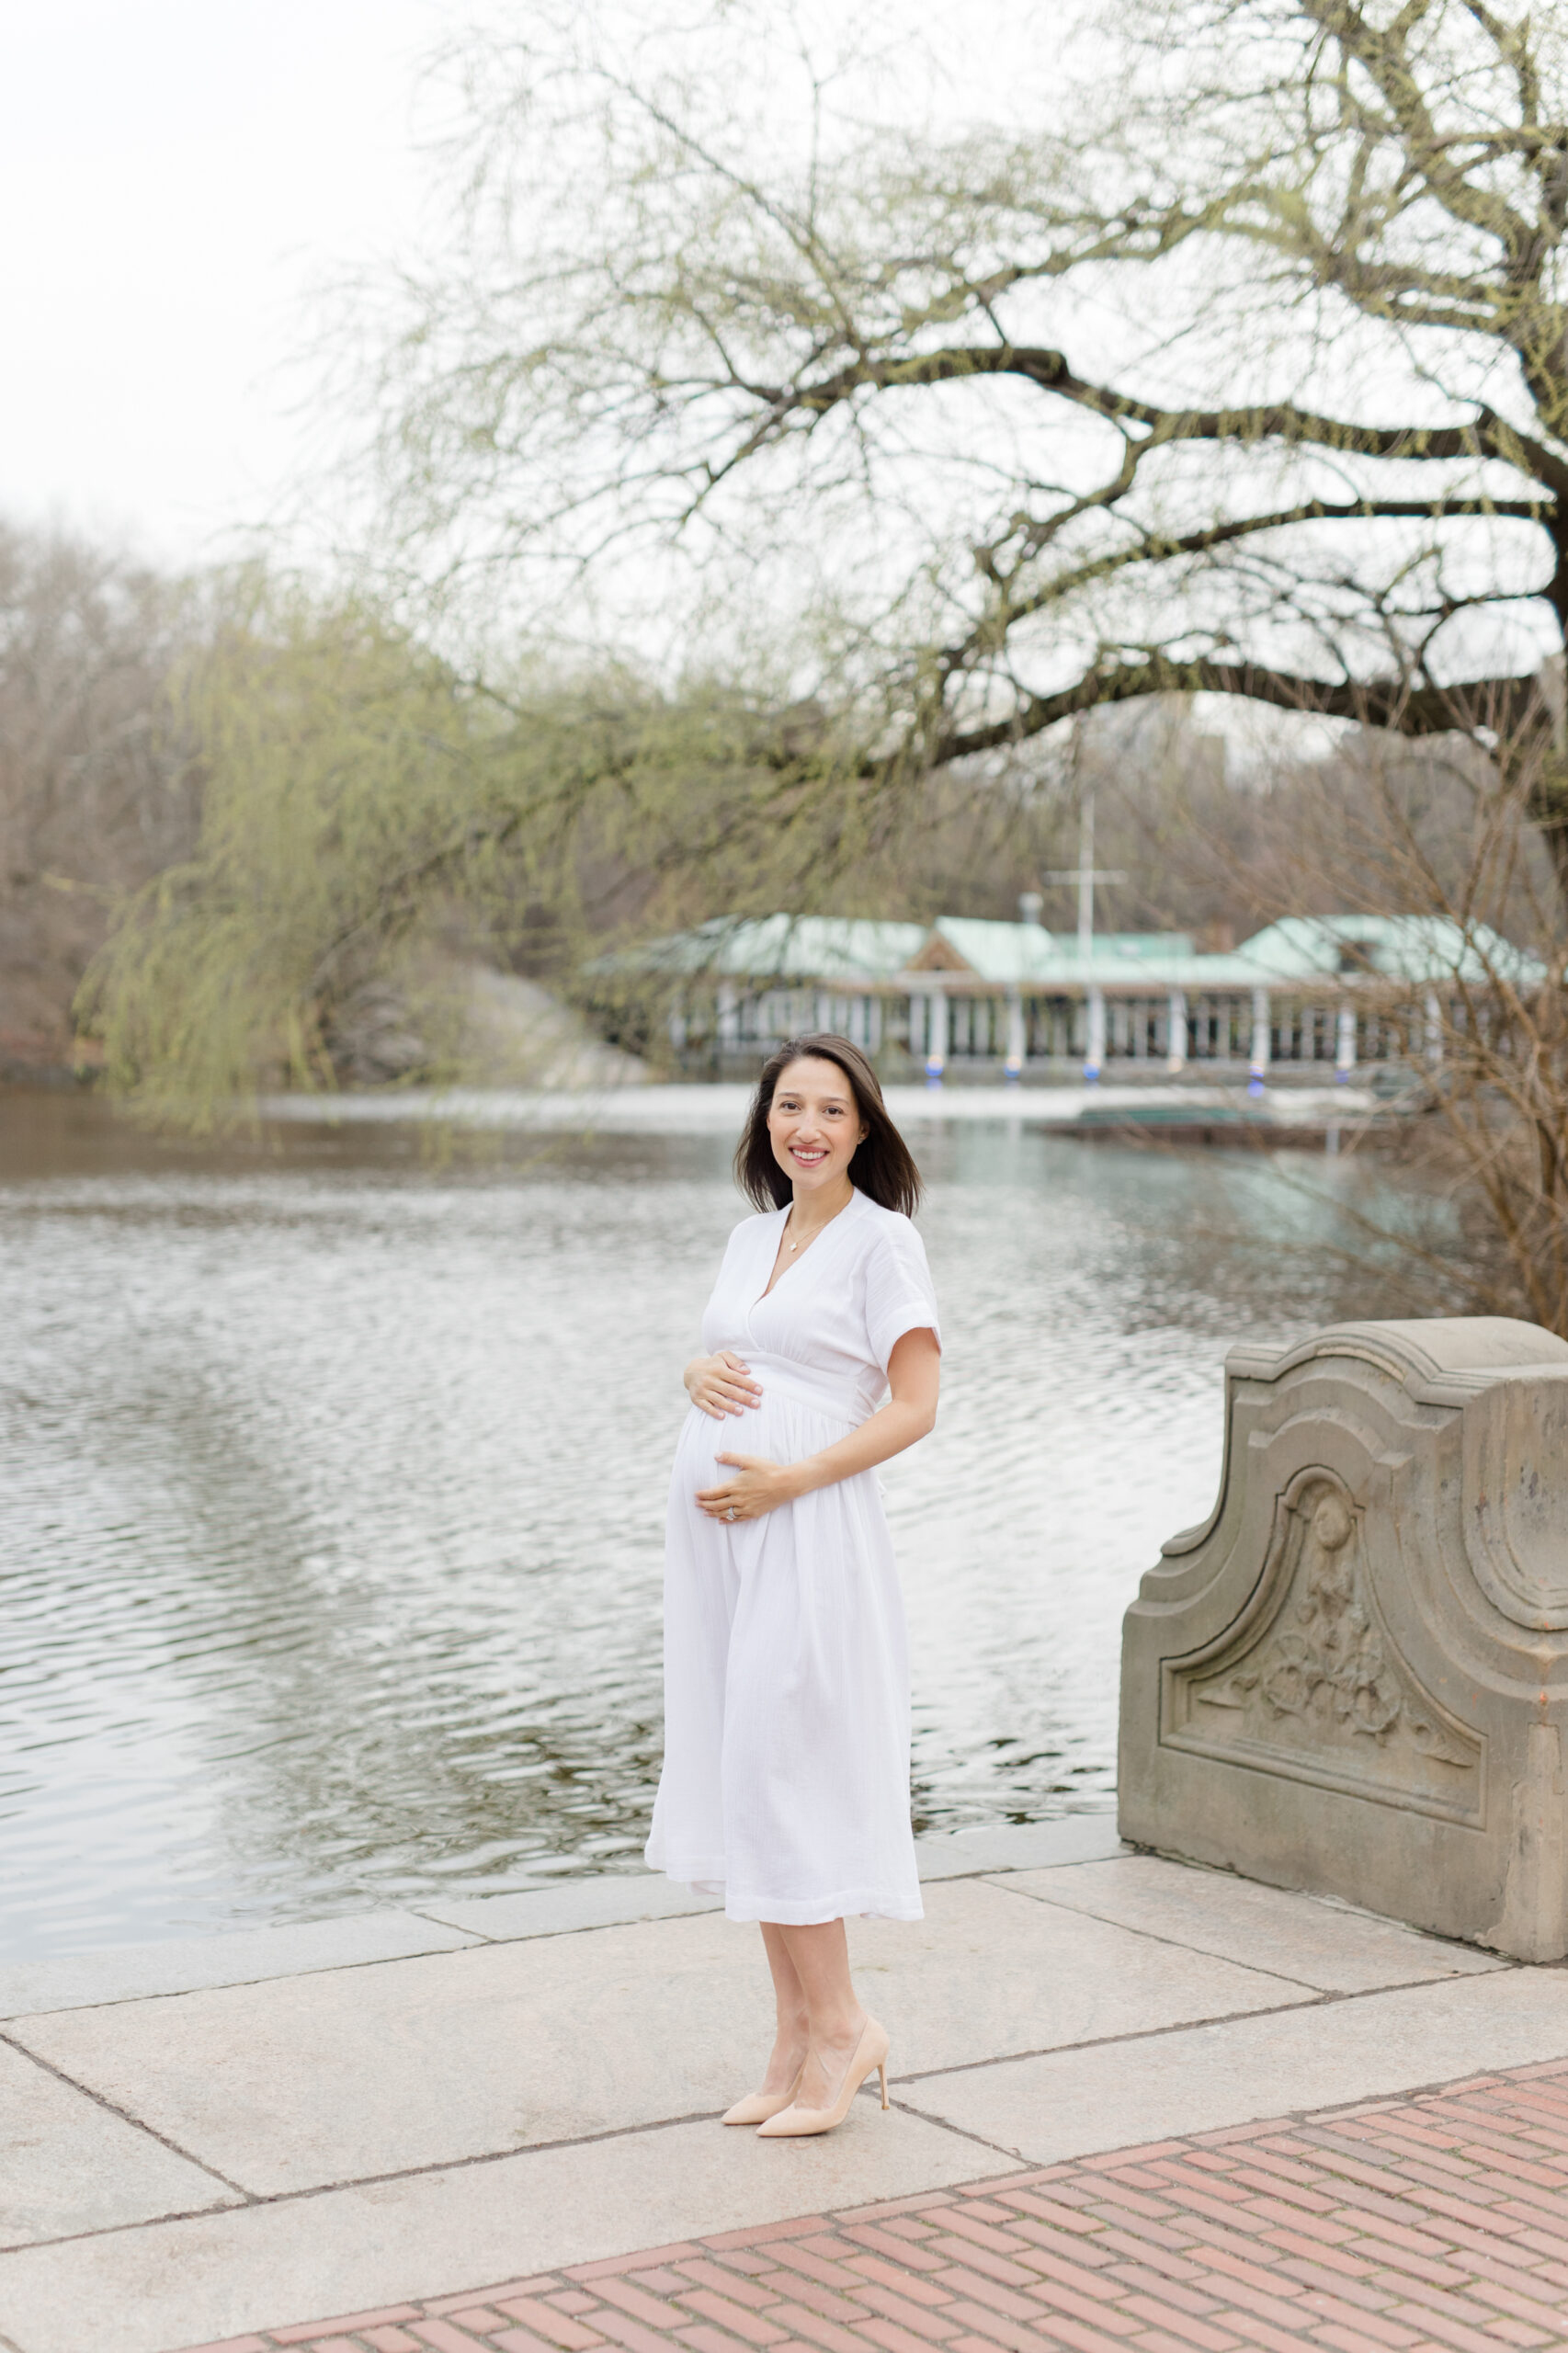 An expecting mother in Central Park during a New York City maternity photography session with Jacqueline Clair Photography